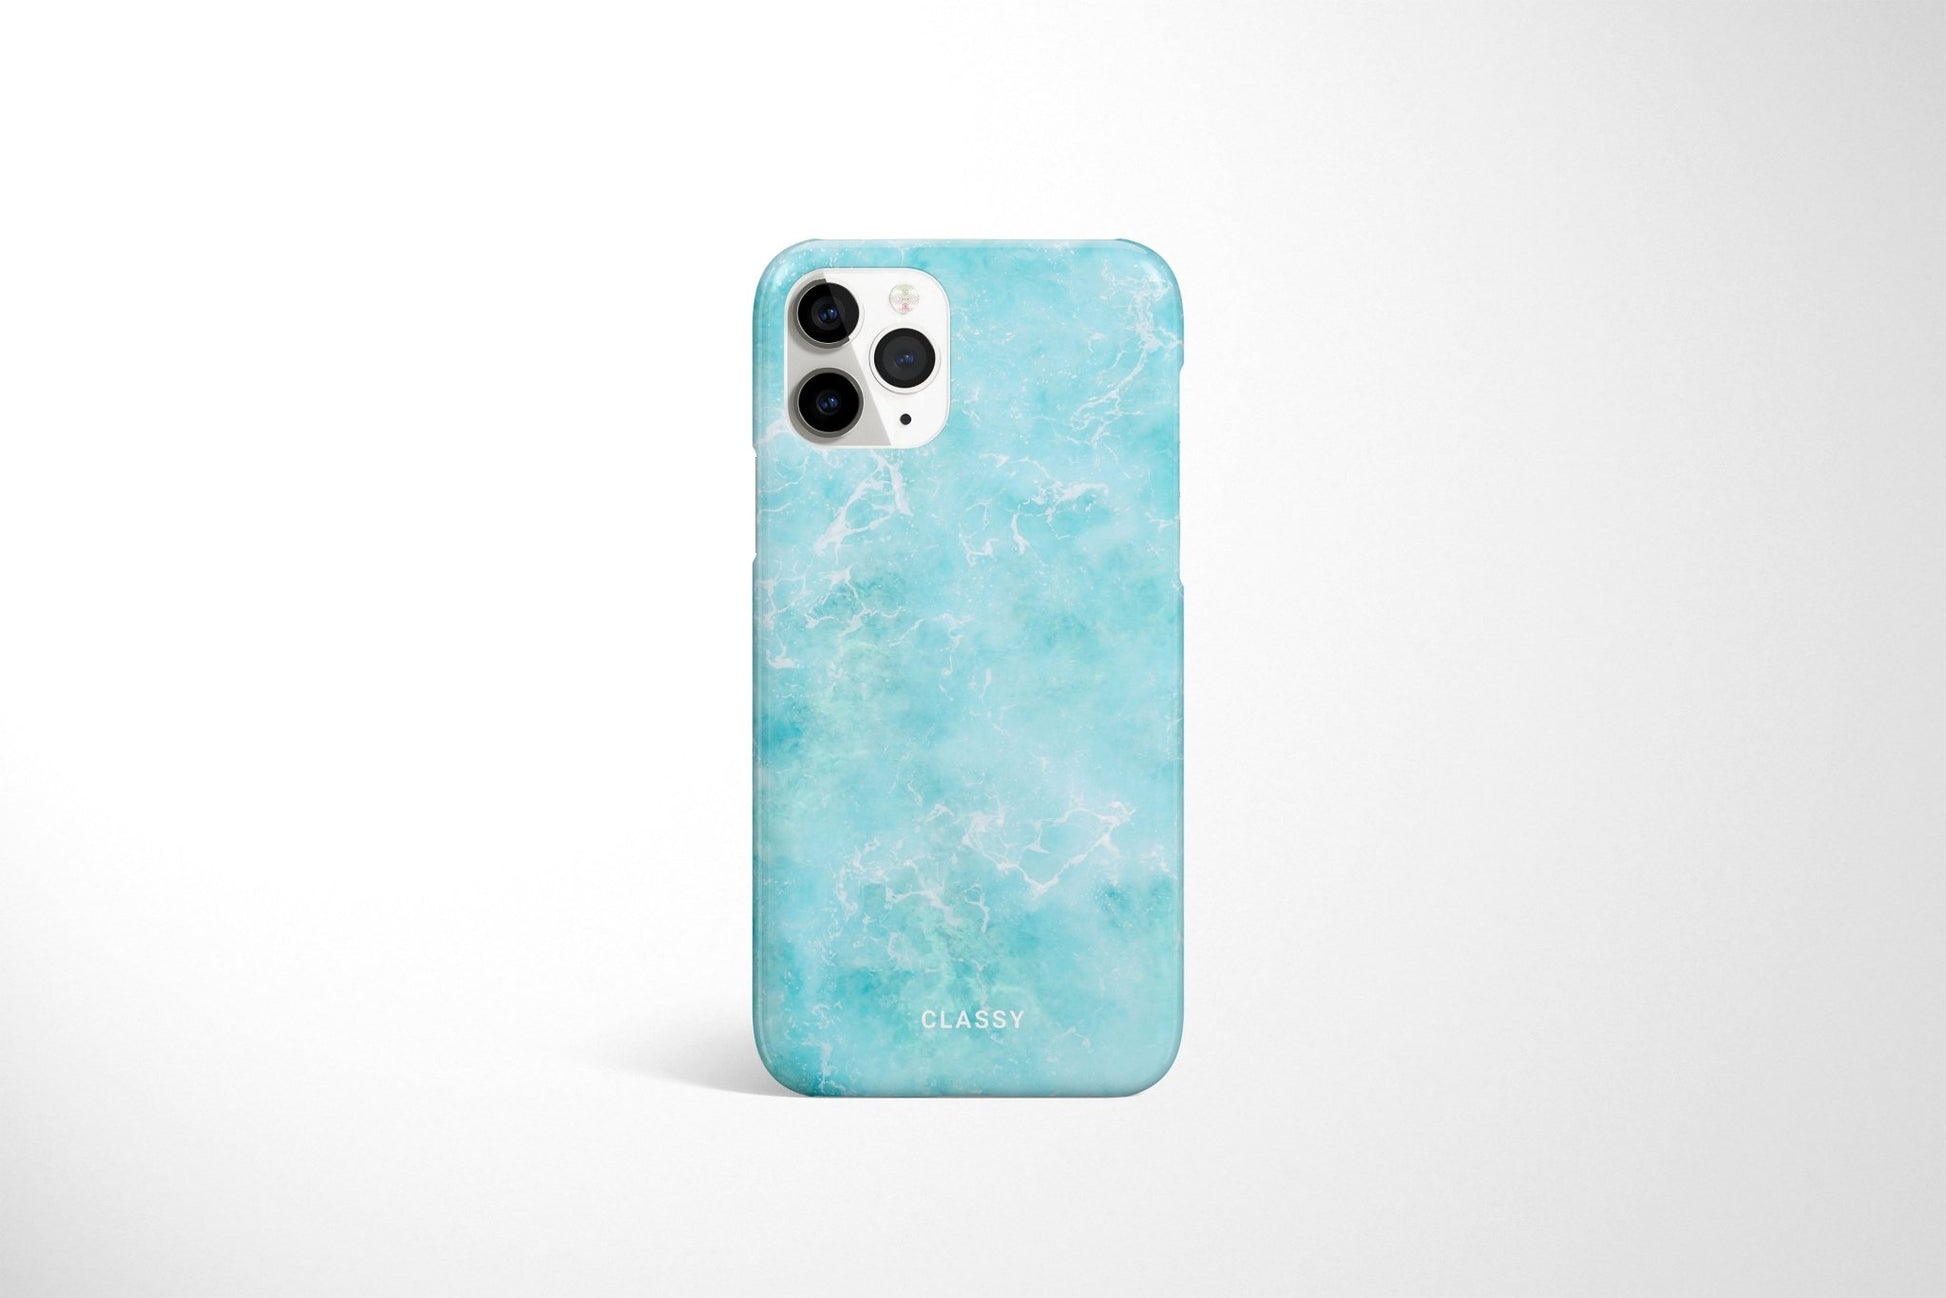 Light Blue Ocean Snap Case - Classy Cases - Phone Case - iPhone 12 Pro Max - Glossy -